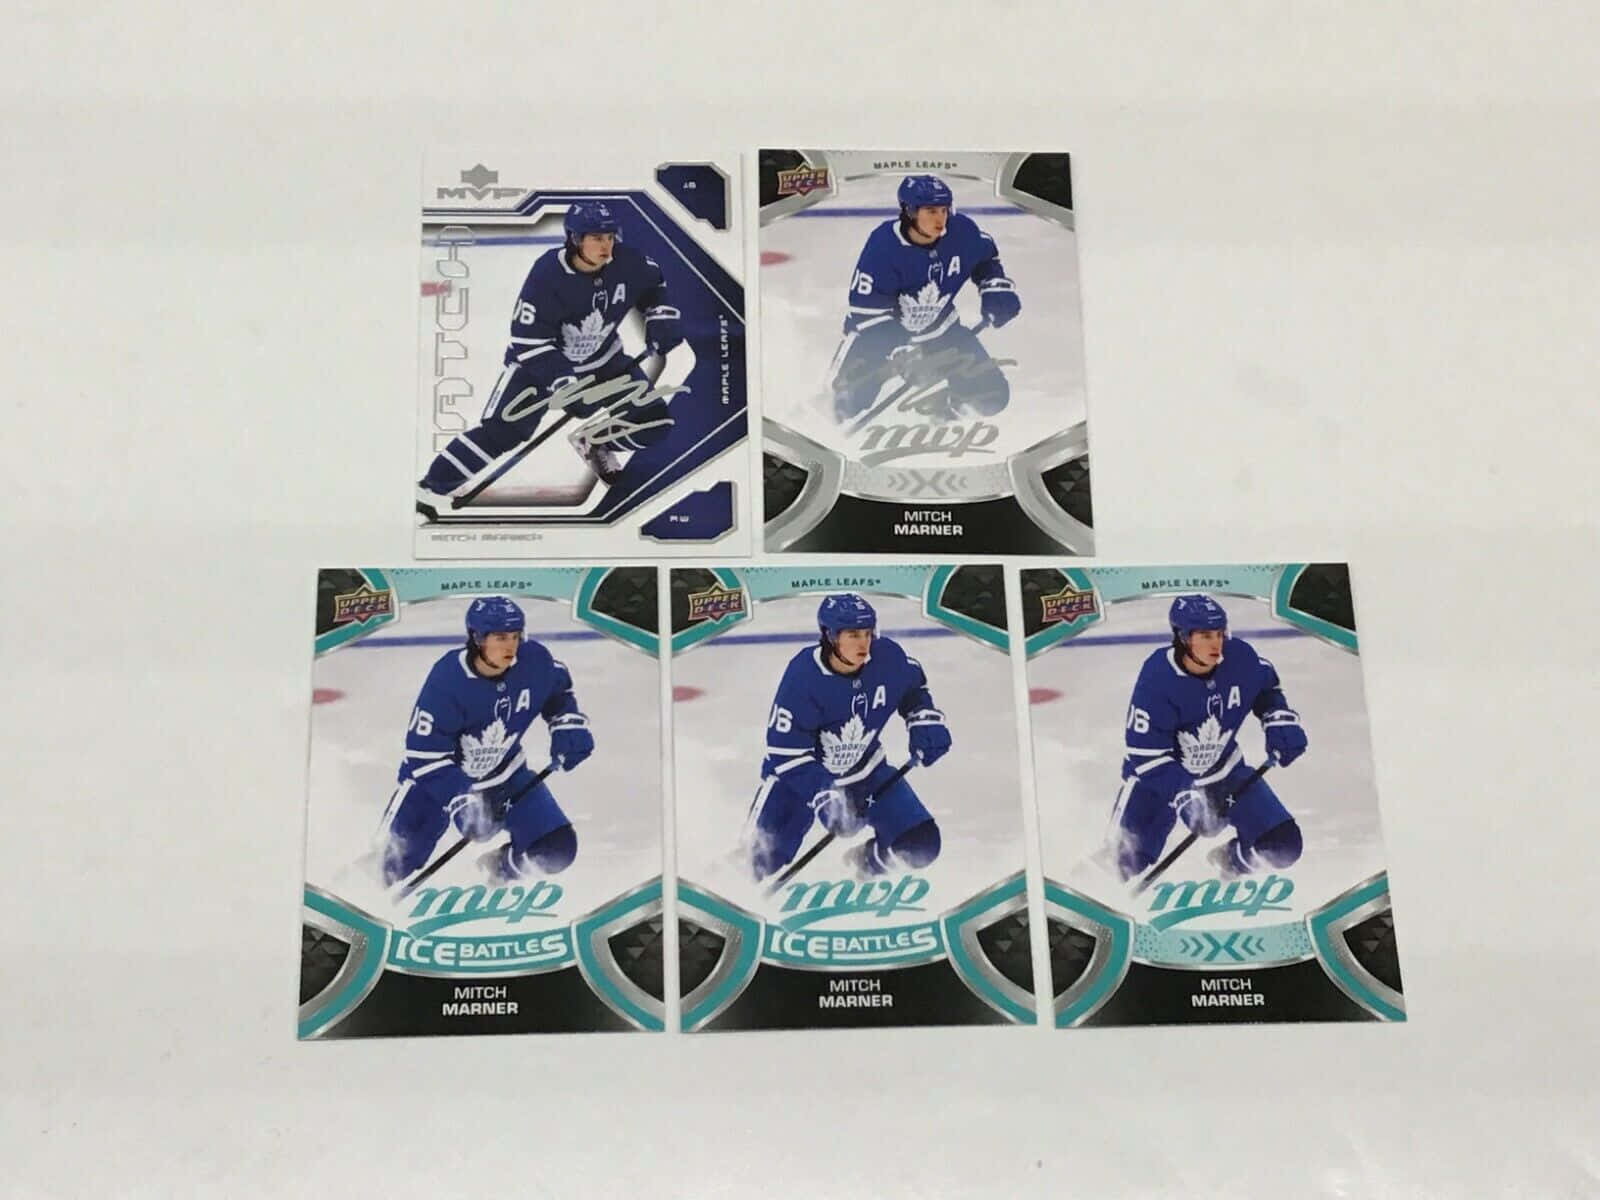 Mitchell Marner Trading Card Collection Wallpaper